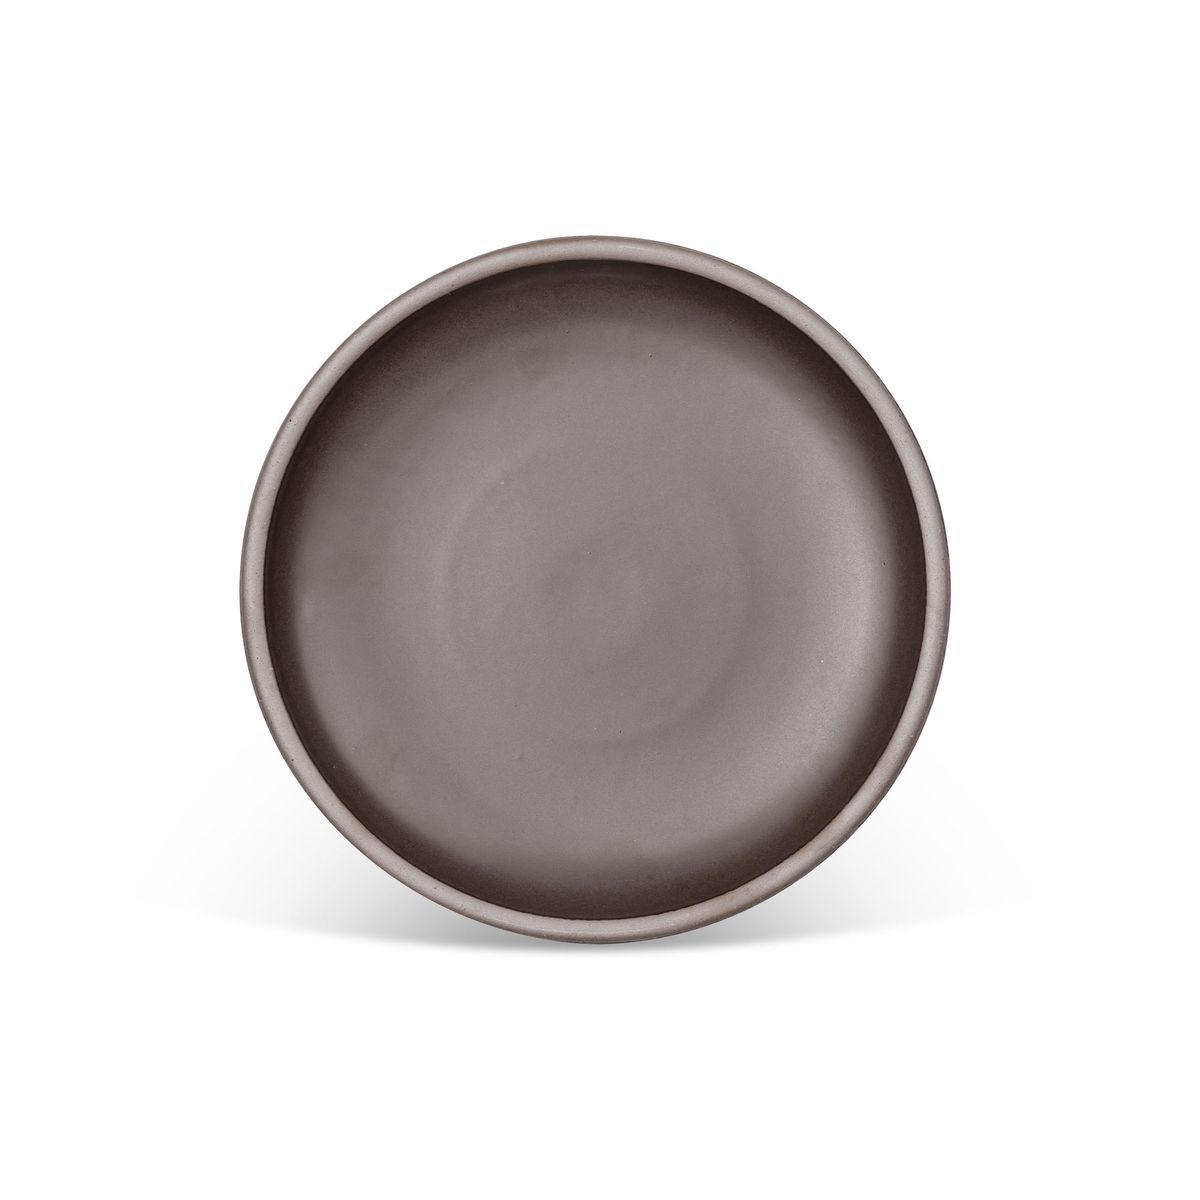 A dinner sized ceramic plate in a dark cool brown color featuring iron speckles and an unglazed rim